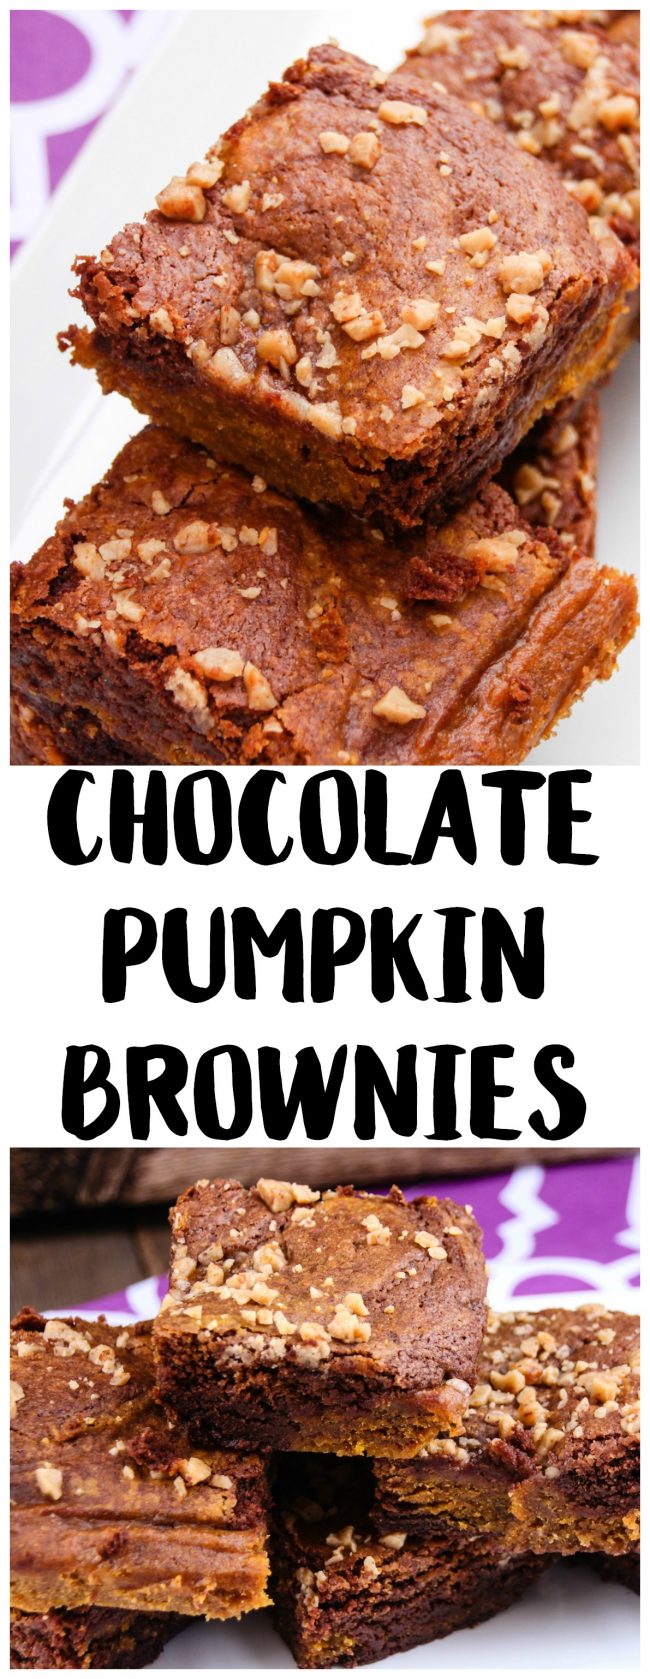 After a long day at the pumpkin patch, there’s nothing more rewarding then making a pumpkin puree and baking some homemade Chocolate Pumpkin Swirl Brownies from scratch! Add this chewy brownie recipe to your Halloween must-bake list alongside pumpkin bars and pumpkin pie!